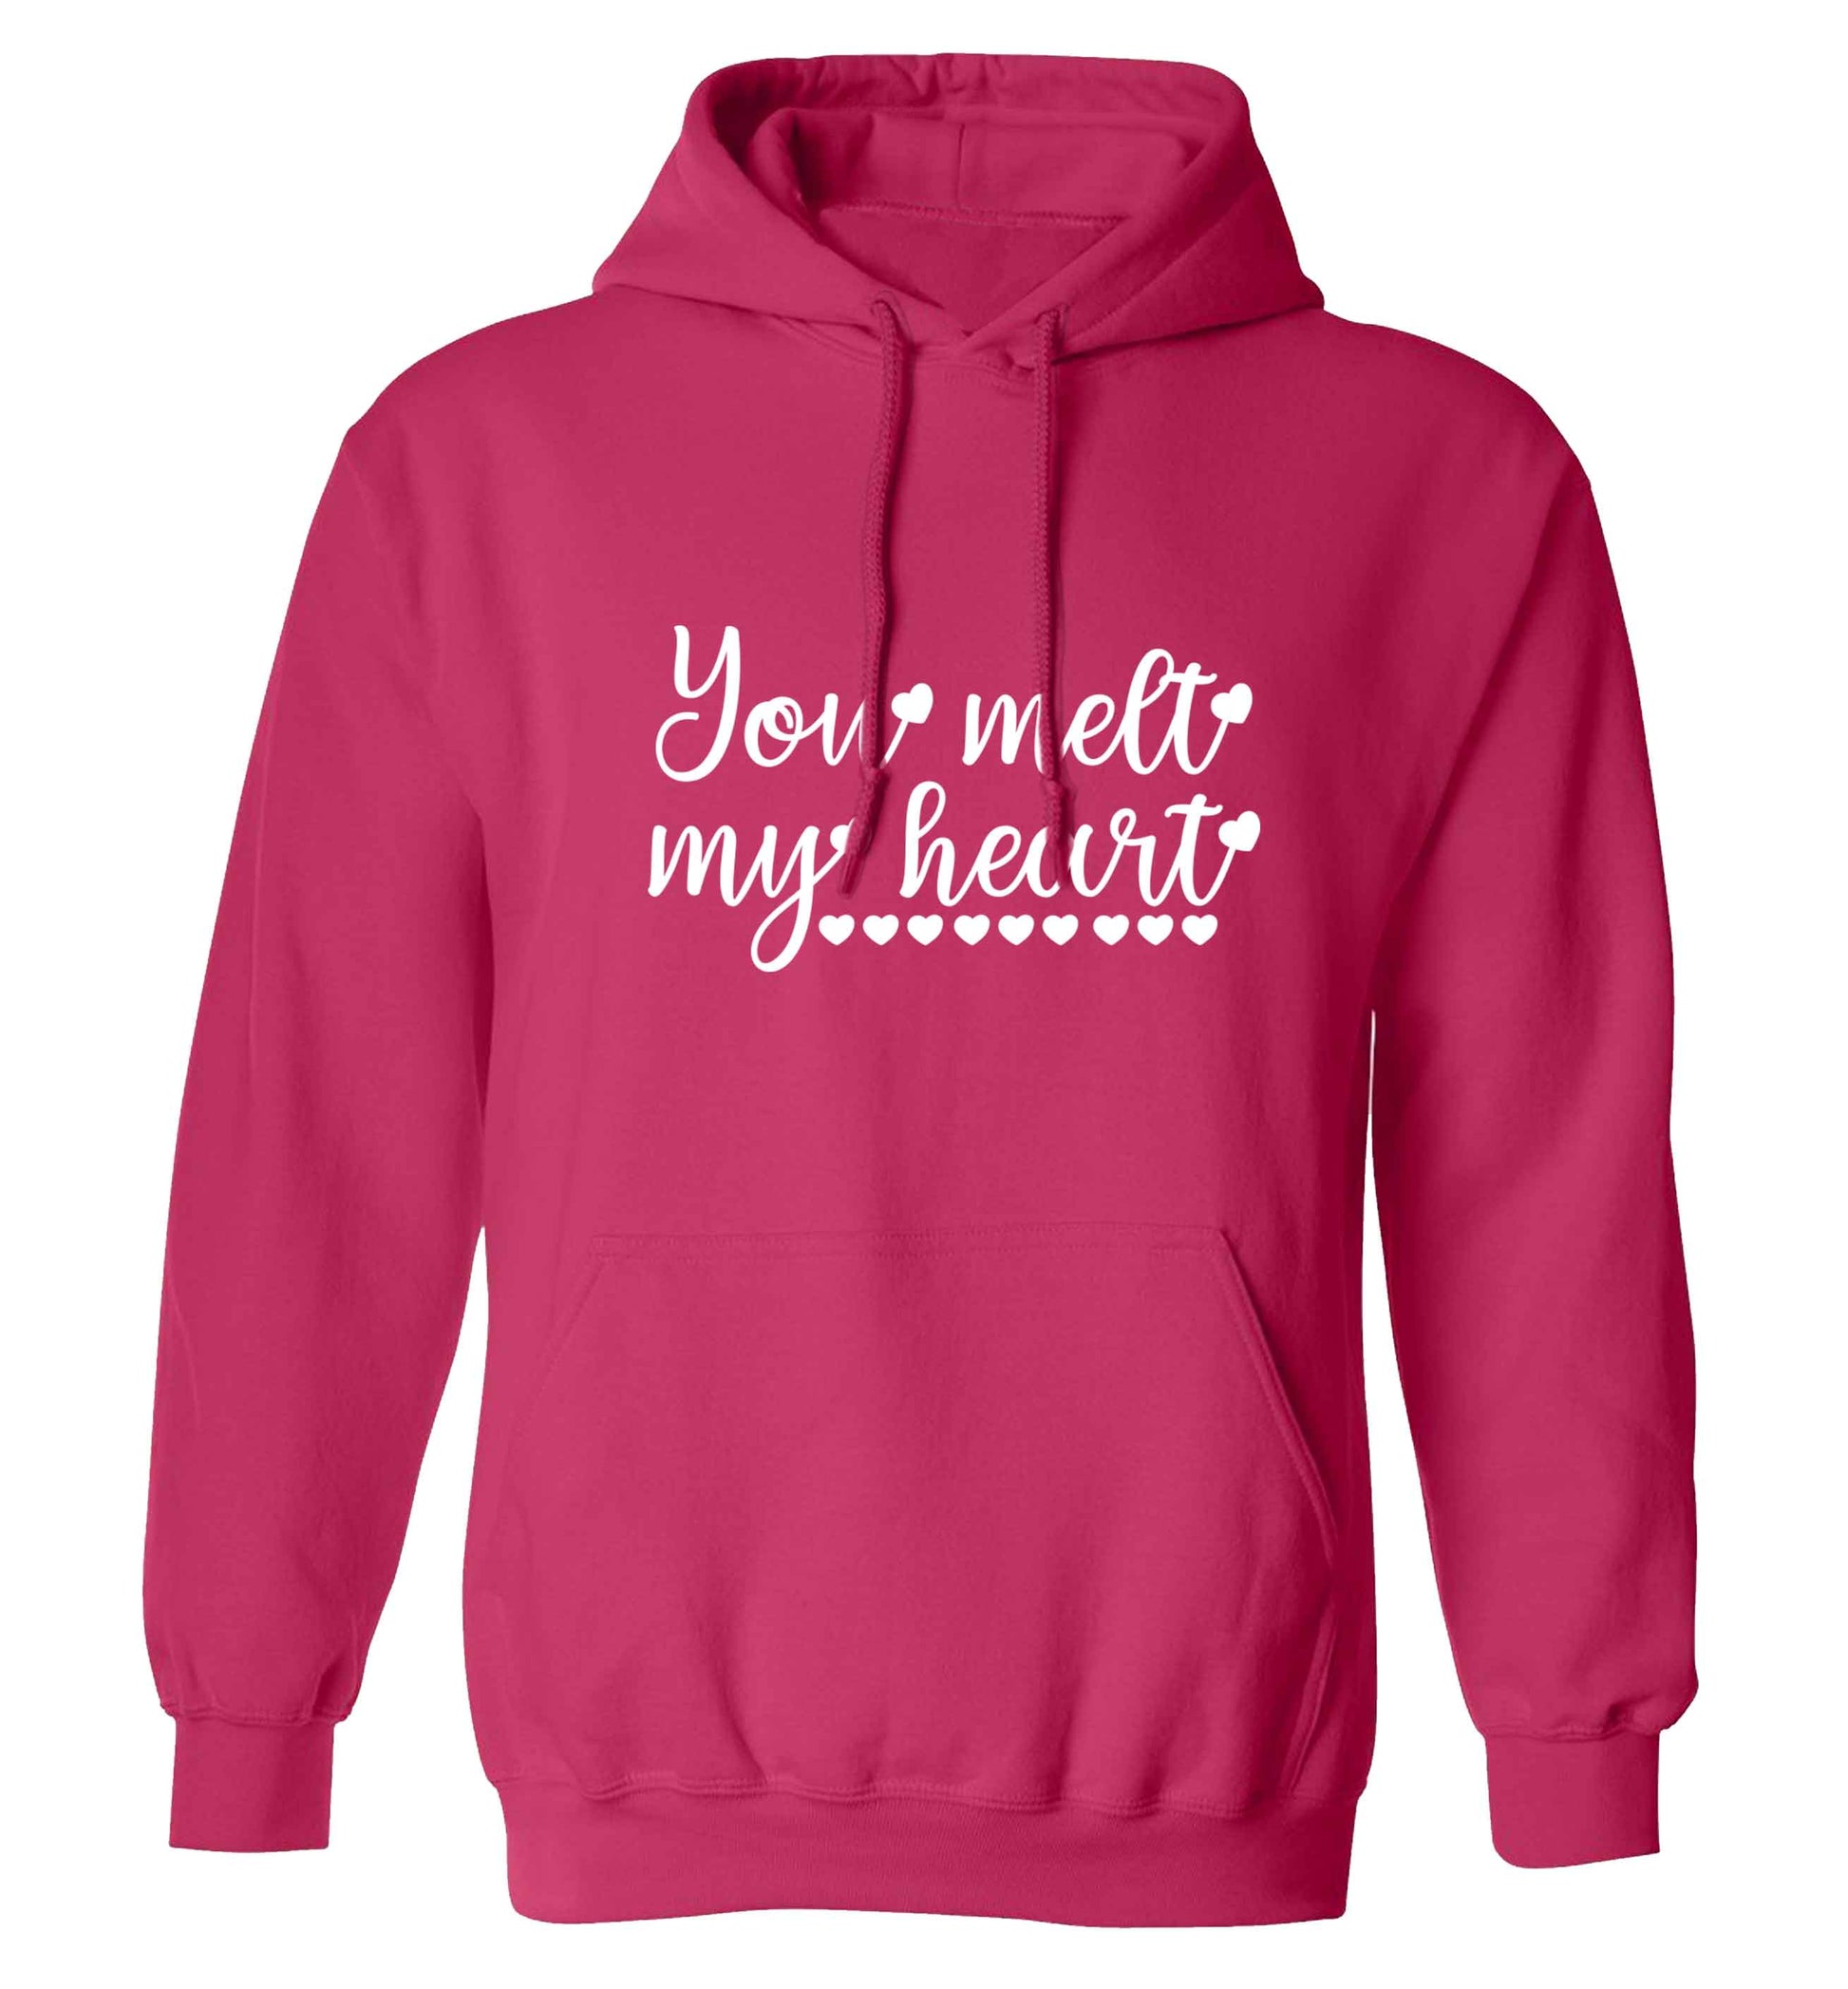 You melt my heart adults unisex pink hoodie 2XL